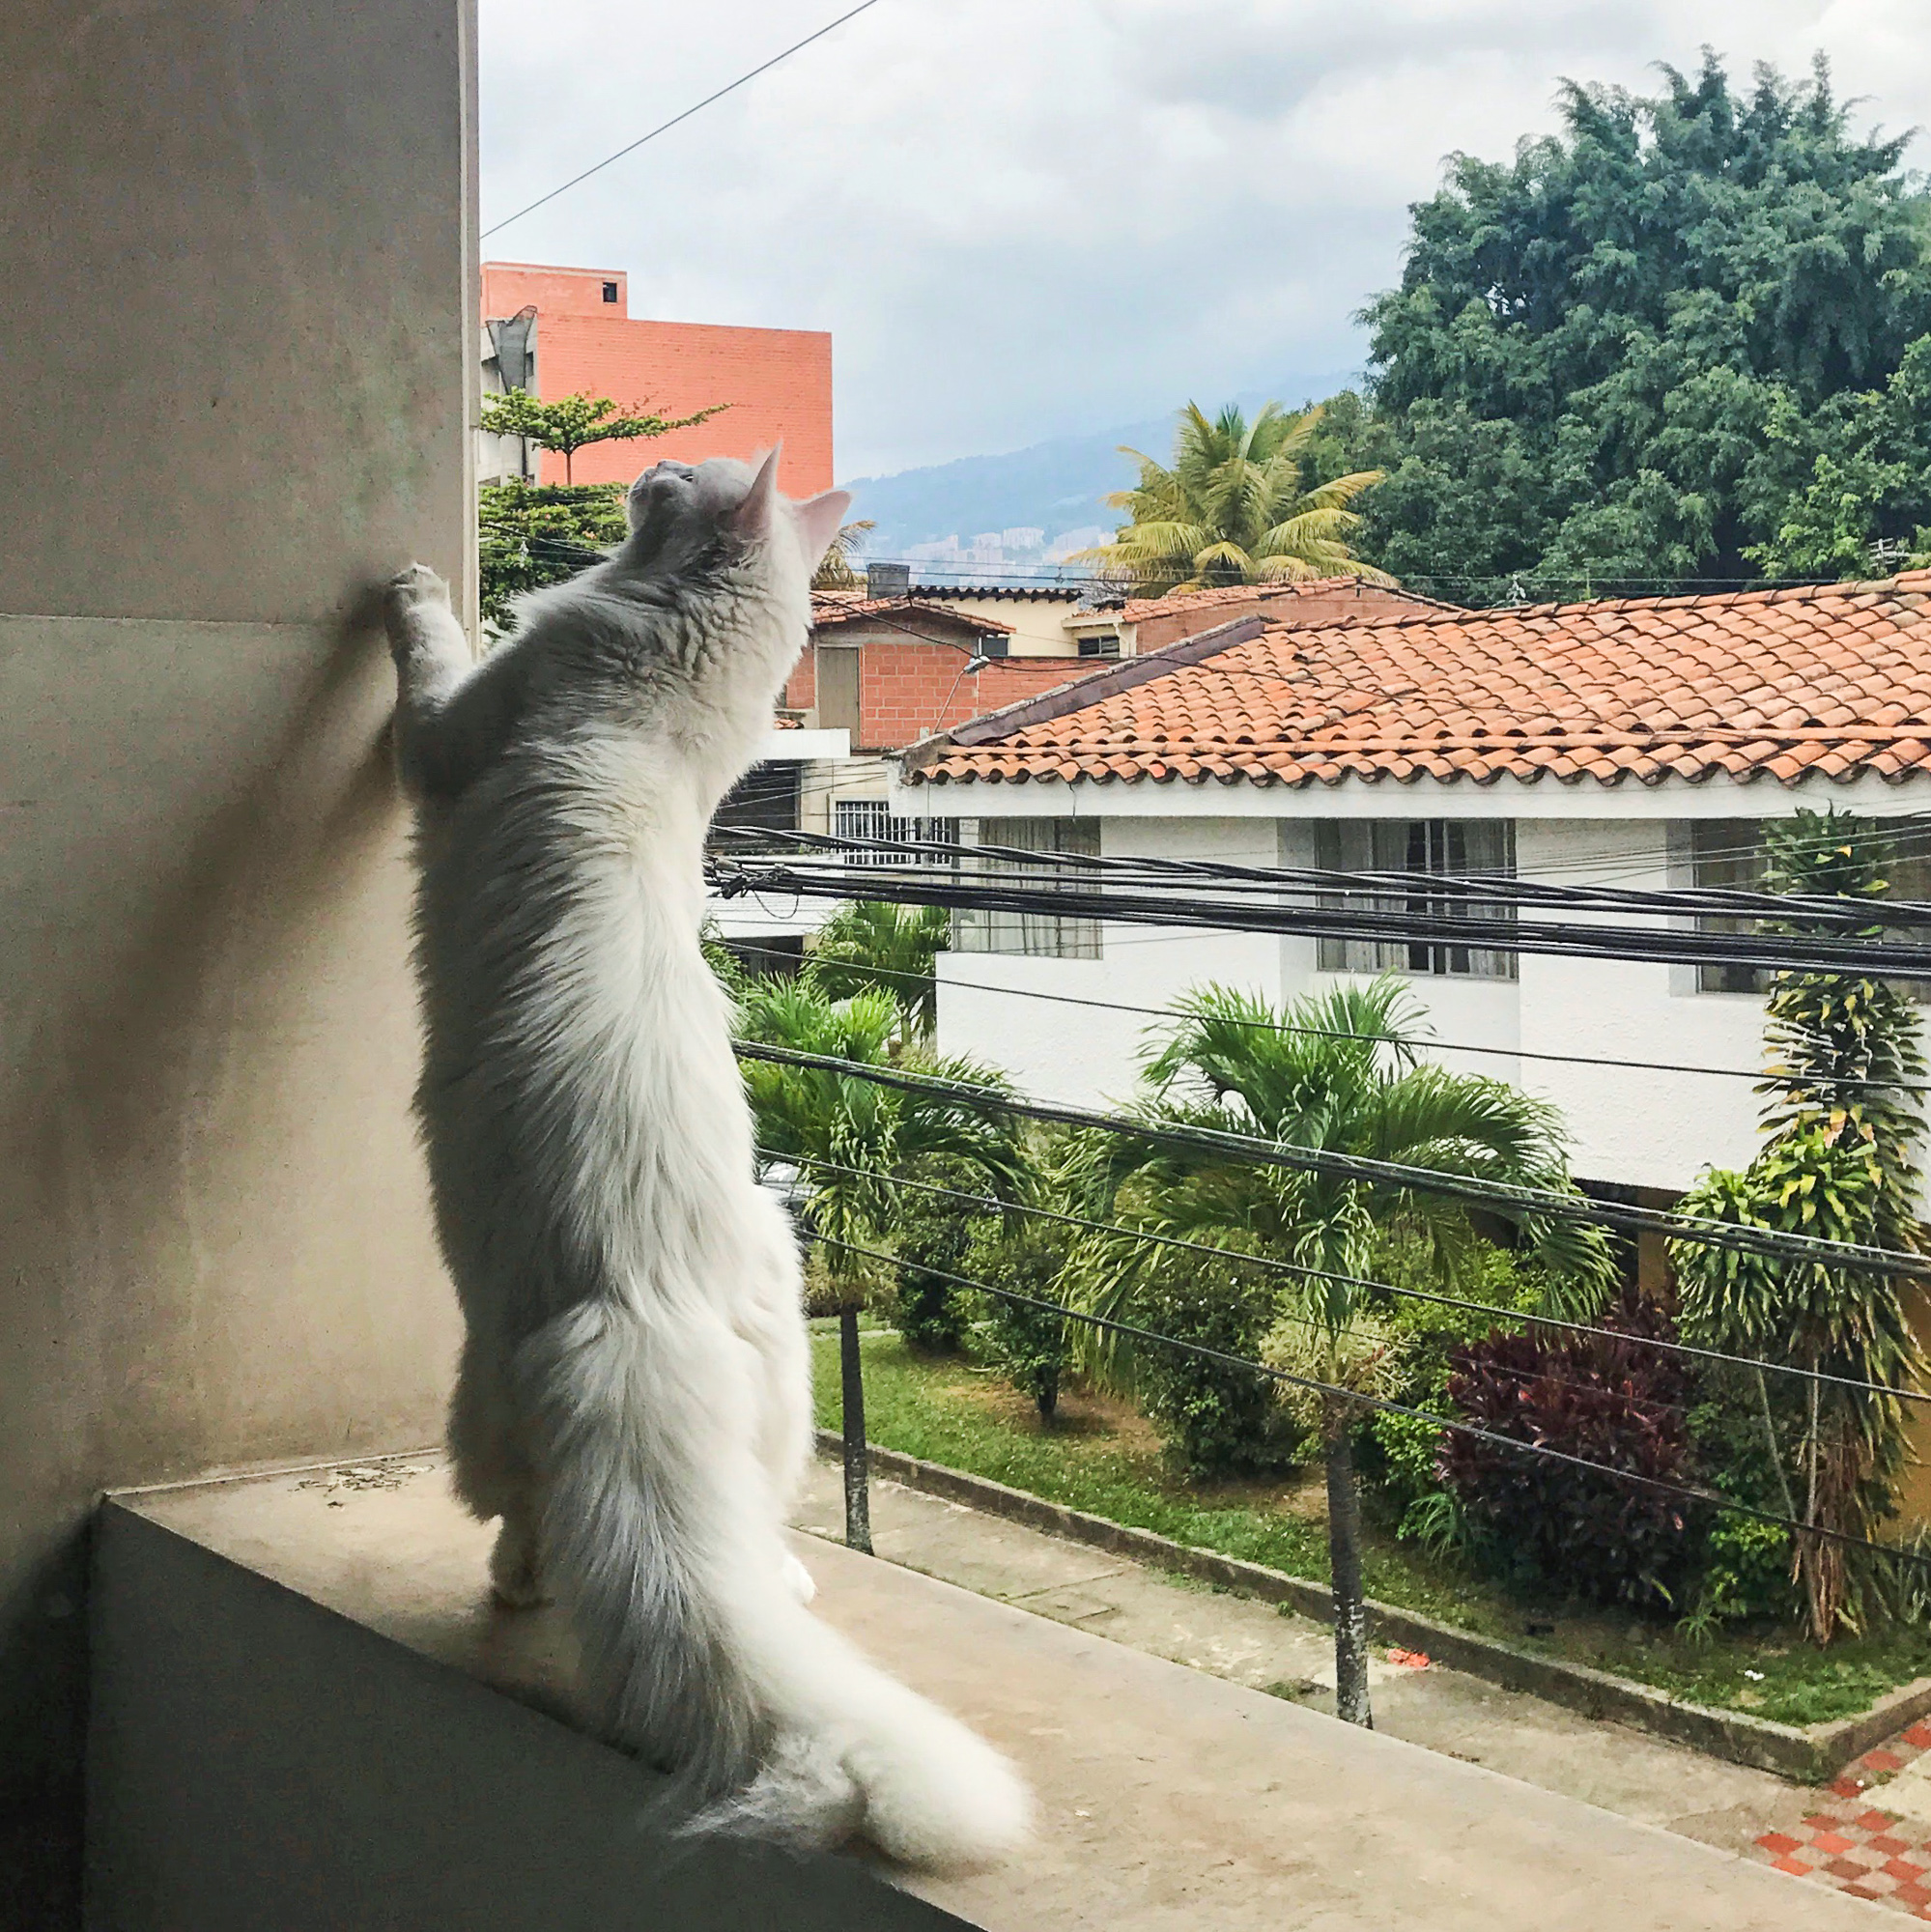 Cezar stretches out in Medellin, Colombia. (Photo: Instagram/@cezars.crew)